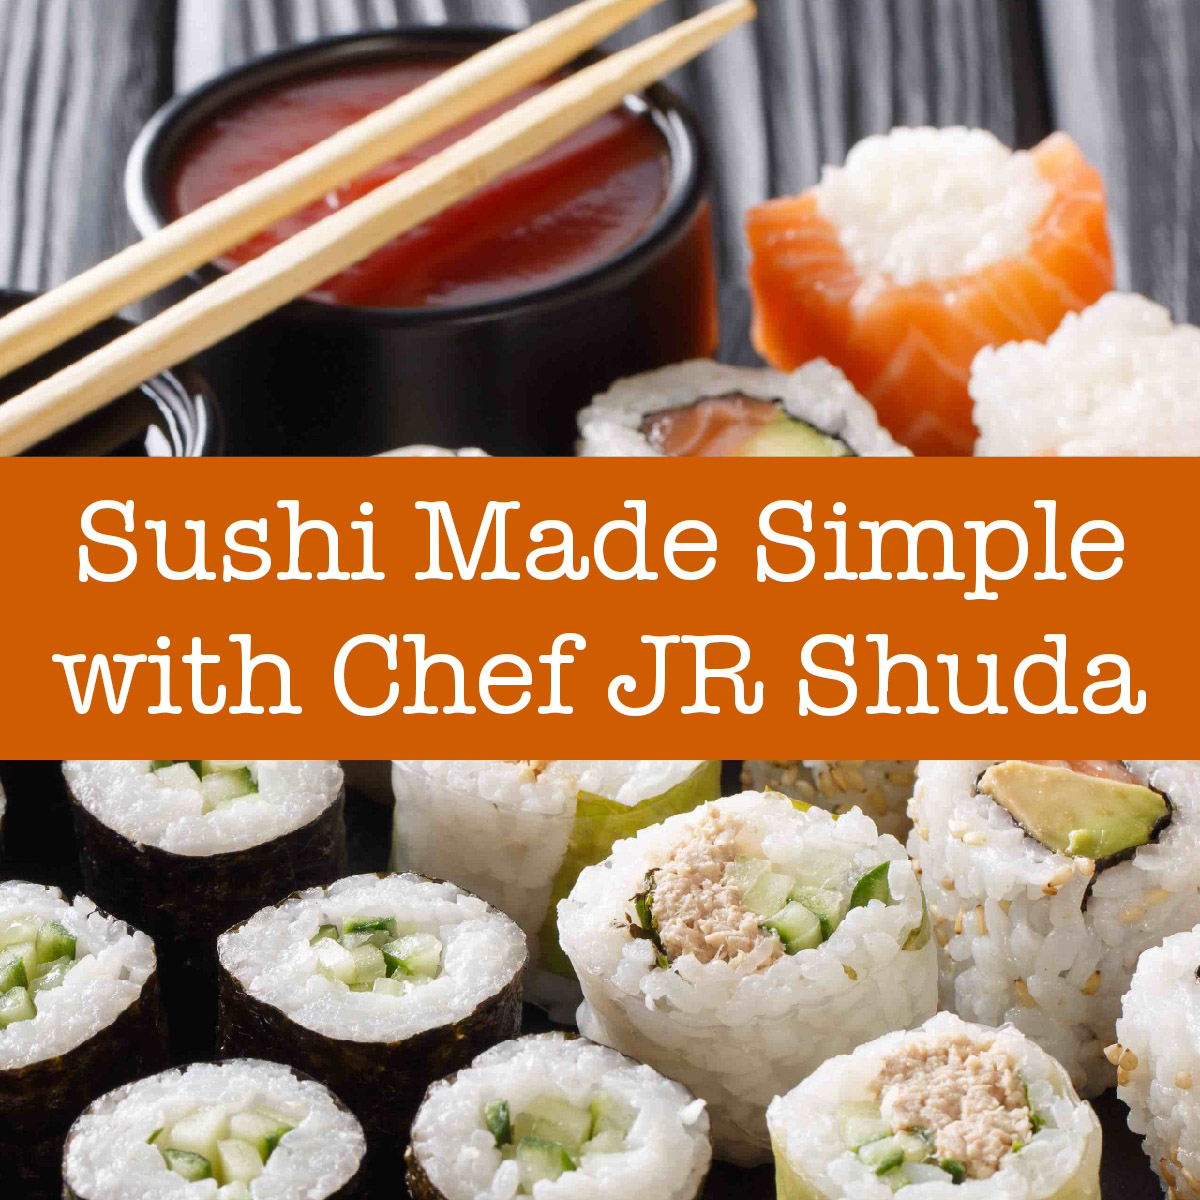 sushi made simple class old city kitchen philadelphia cooking classes